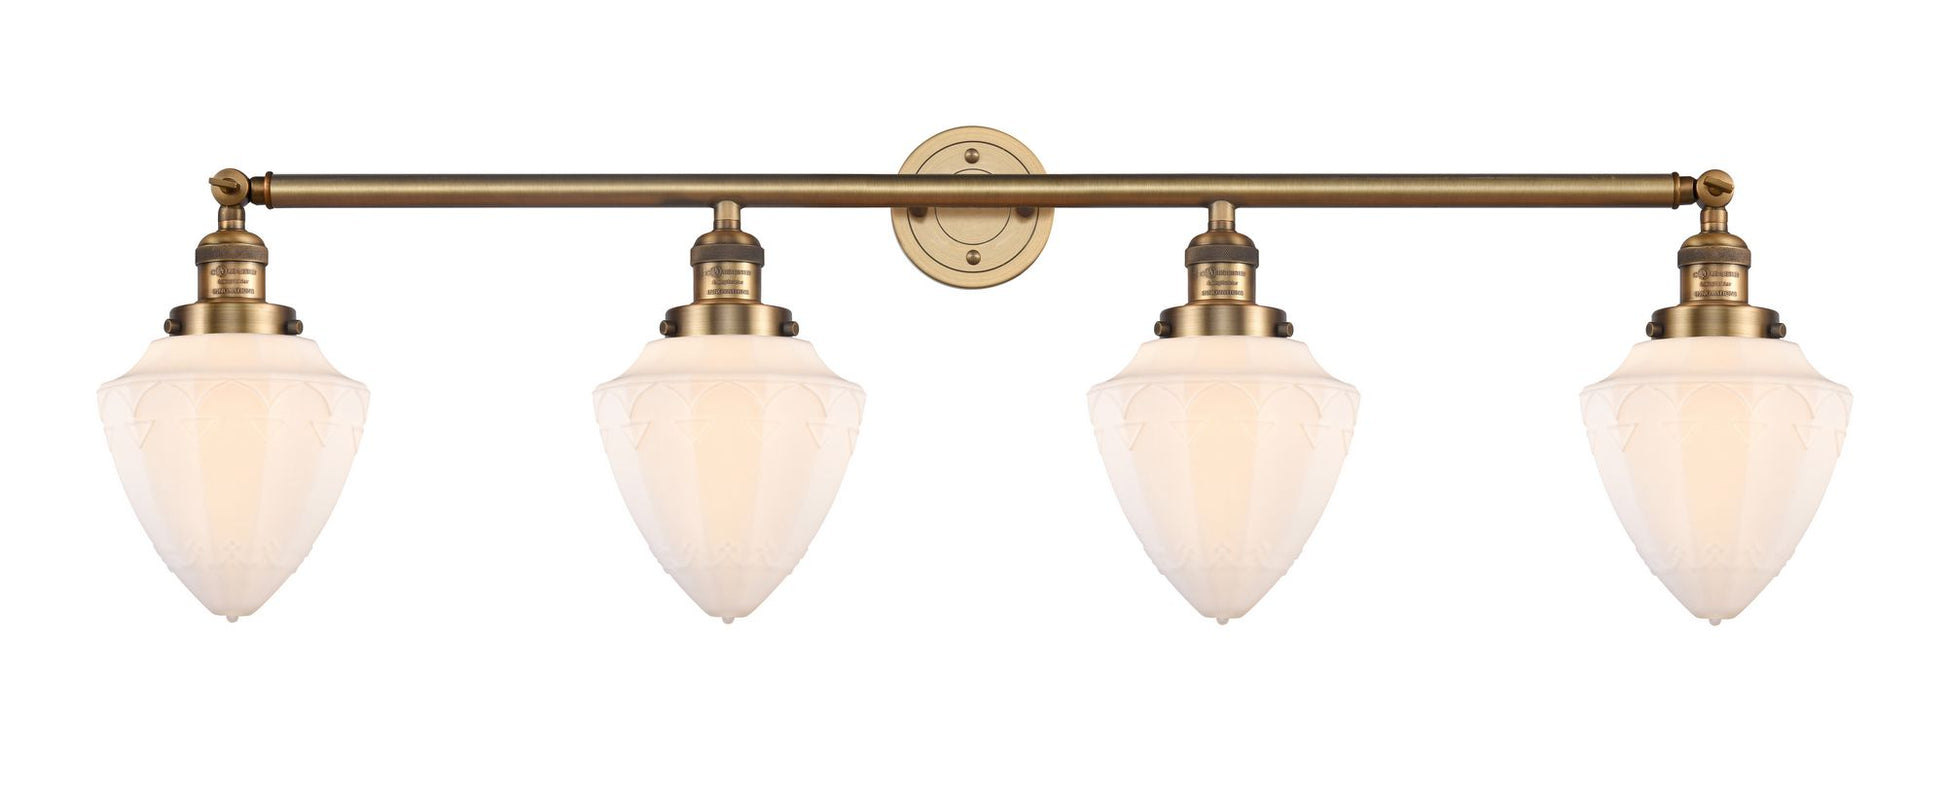 215-BB-G661-7 4-Light 45.75" Brushed Brass Bath Vanity Light - Matte White Cased Small Bullet Glass - LED Bulb - Dimmensions: 45.75 x 8 x 15 - Glass Up or Down: Yes